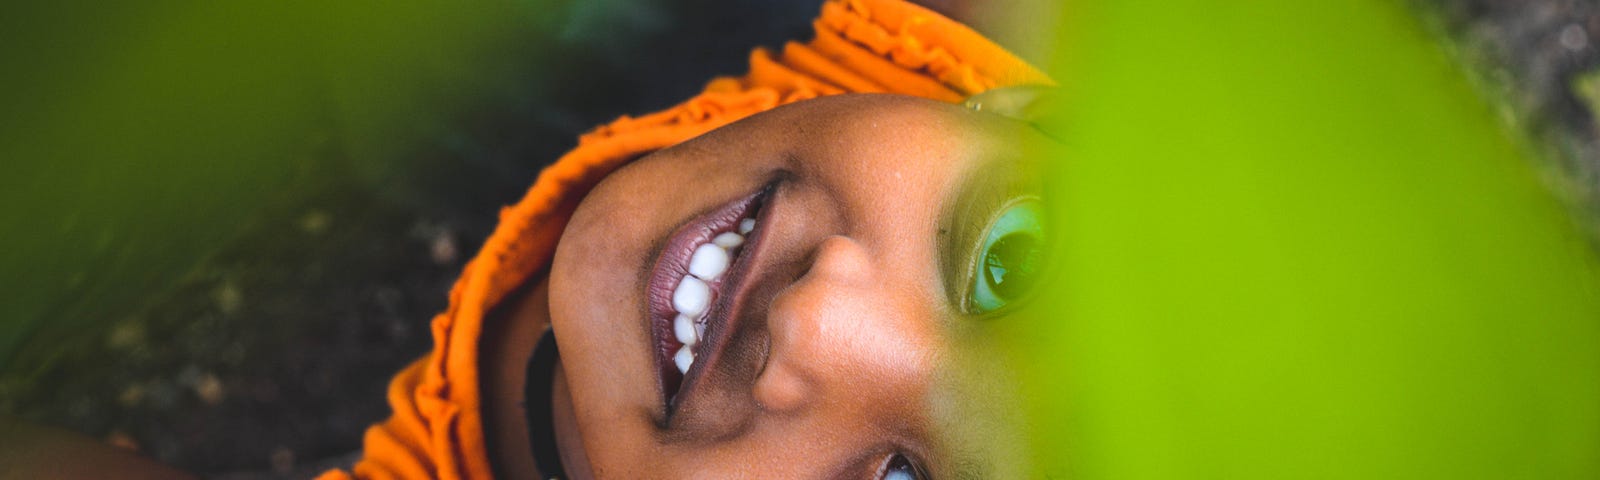 A young girl looks up toward the camera through bright green leaves